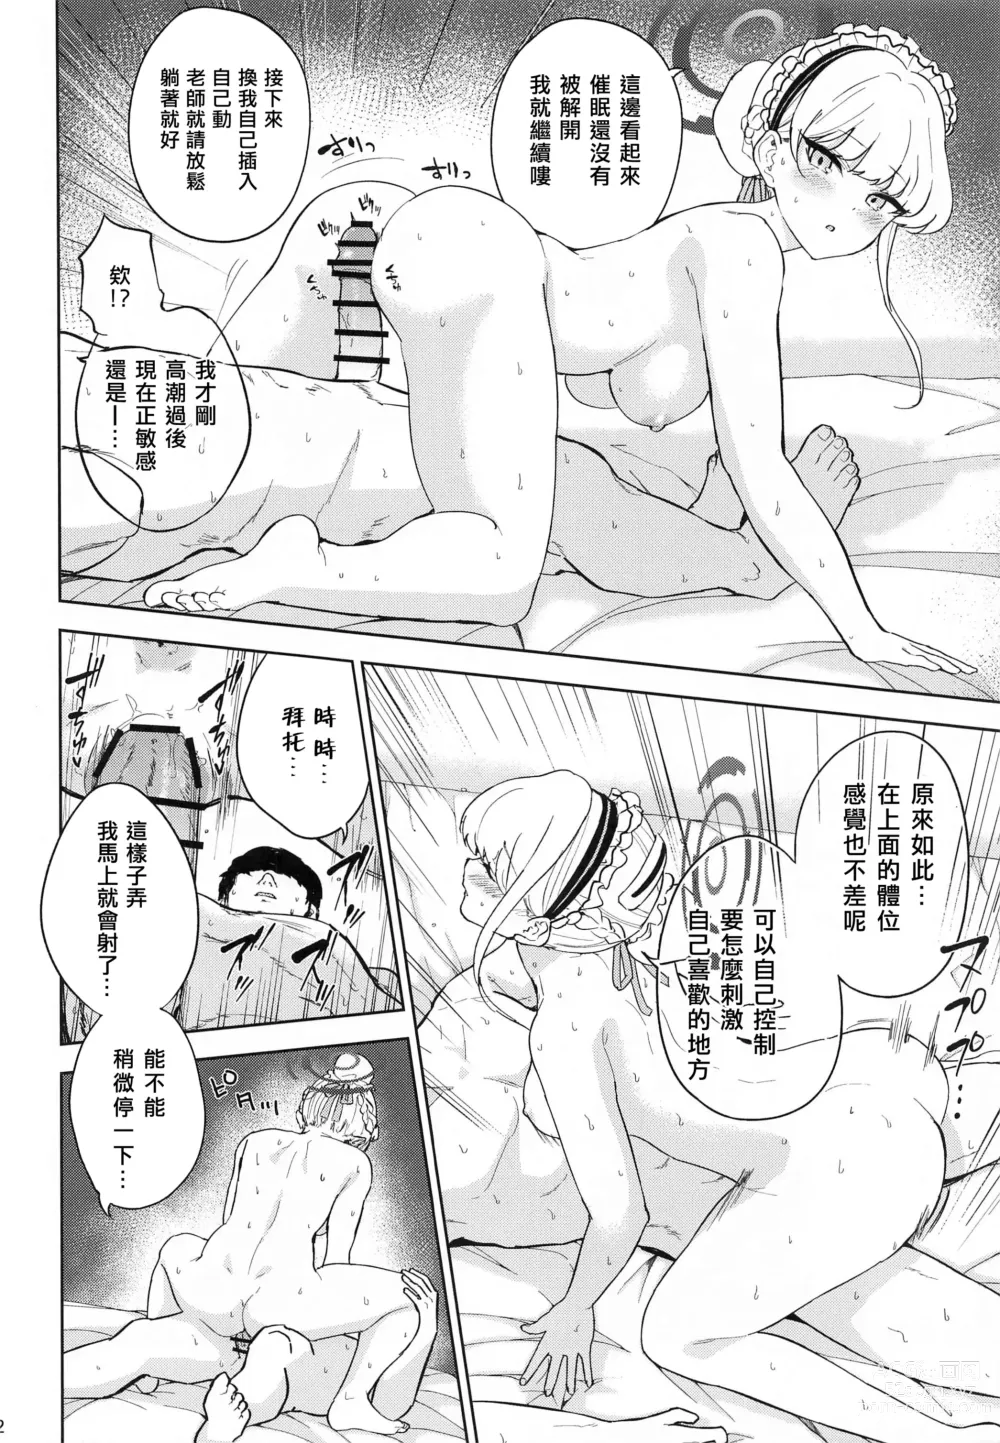 Page 23 of doujinshi Made in Maid